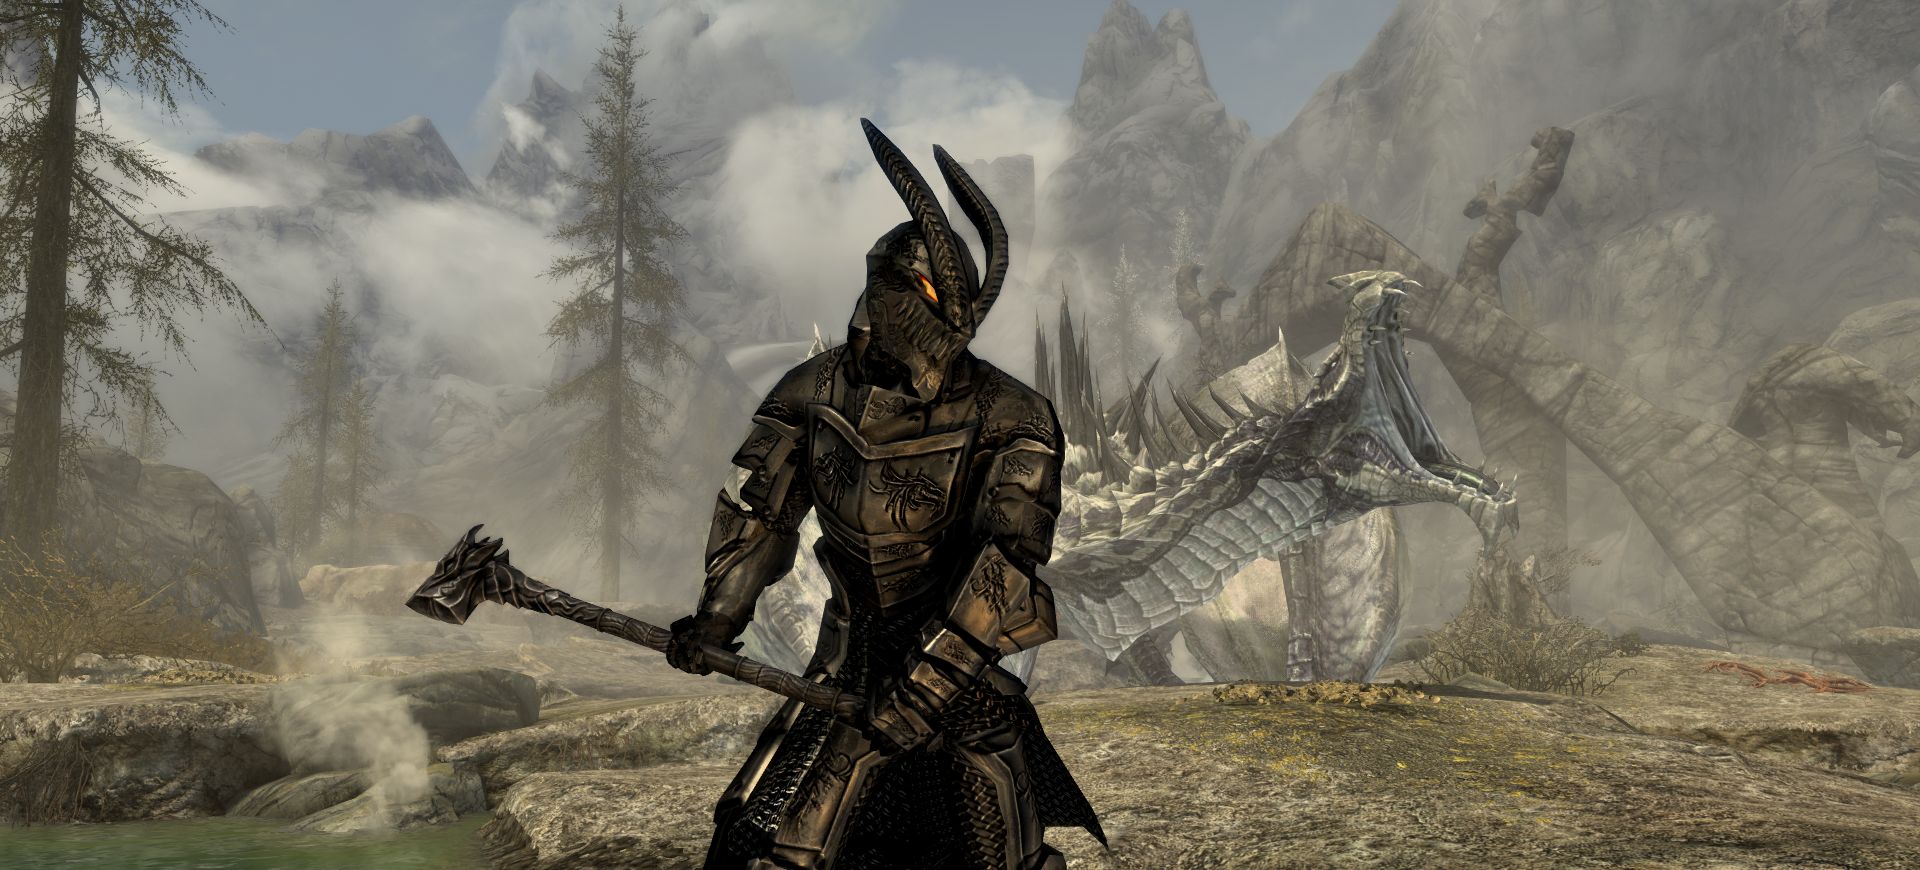 Today, we are going to be covering the Skyrim online co op mod that will be released this week, so you can learn how to enjoy Skyrim with your friends.